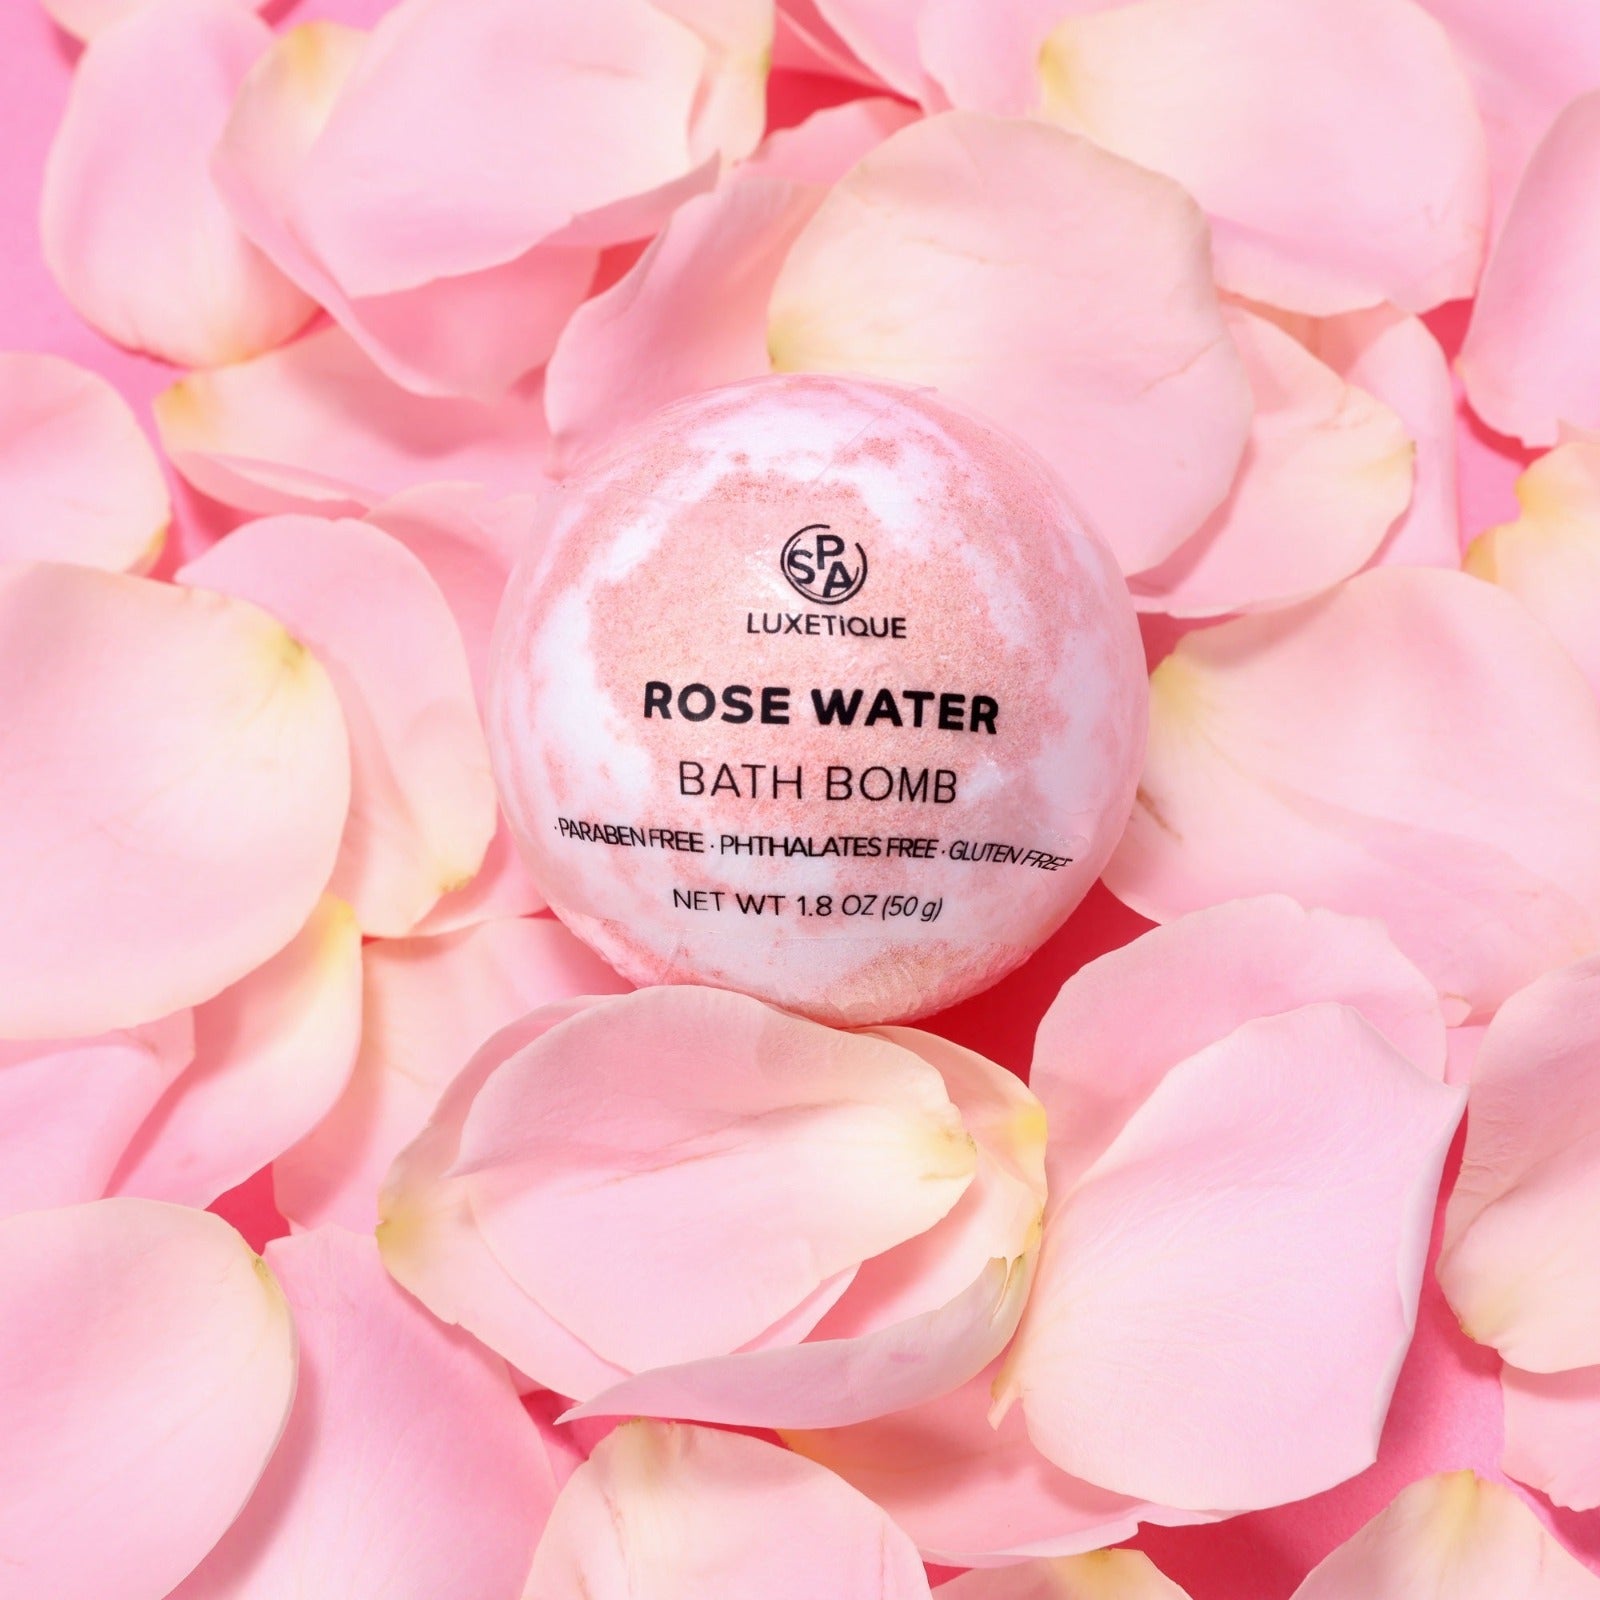 12pcs Gifts Rose Water Gift Set. Transform your bath into a luxurious spa experience with our Rose Oil Bath Bomb. Infused with moisturizing Coconut Oil, Vitamin E, and Shea Butter, this bath bomb will leave your skin hydrated, soft, and glowing. Soothing Rose Oil will provide a calming aroma and enhance your skin's natural radiance. Indulge in ultimate relaxation and rejuvenation at home with our Rose Oil Bath Bomb.